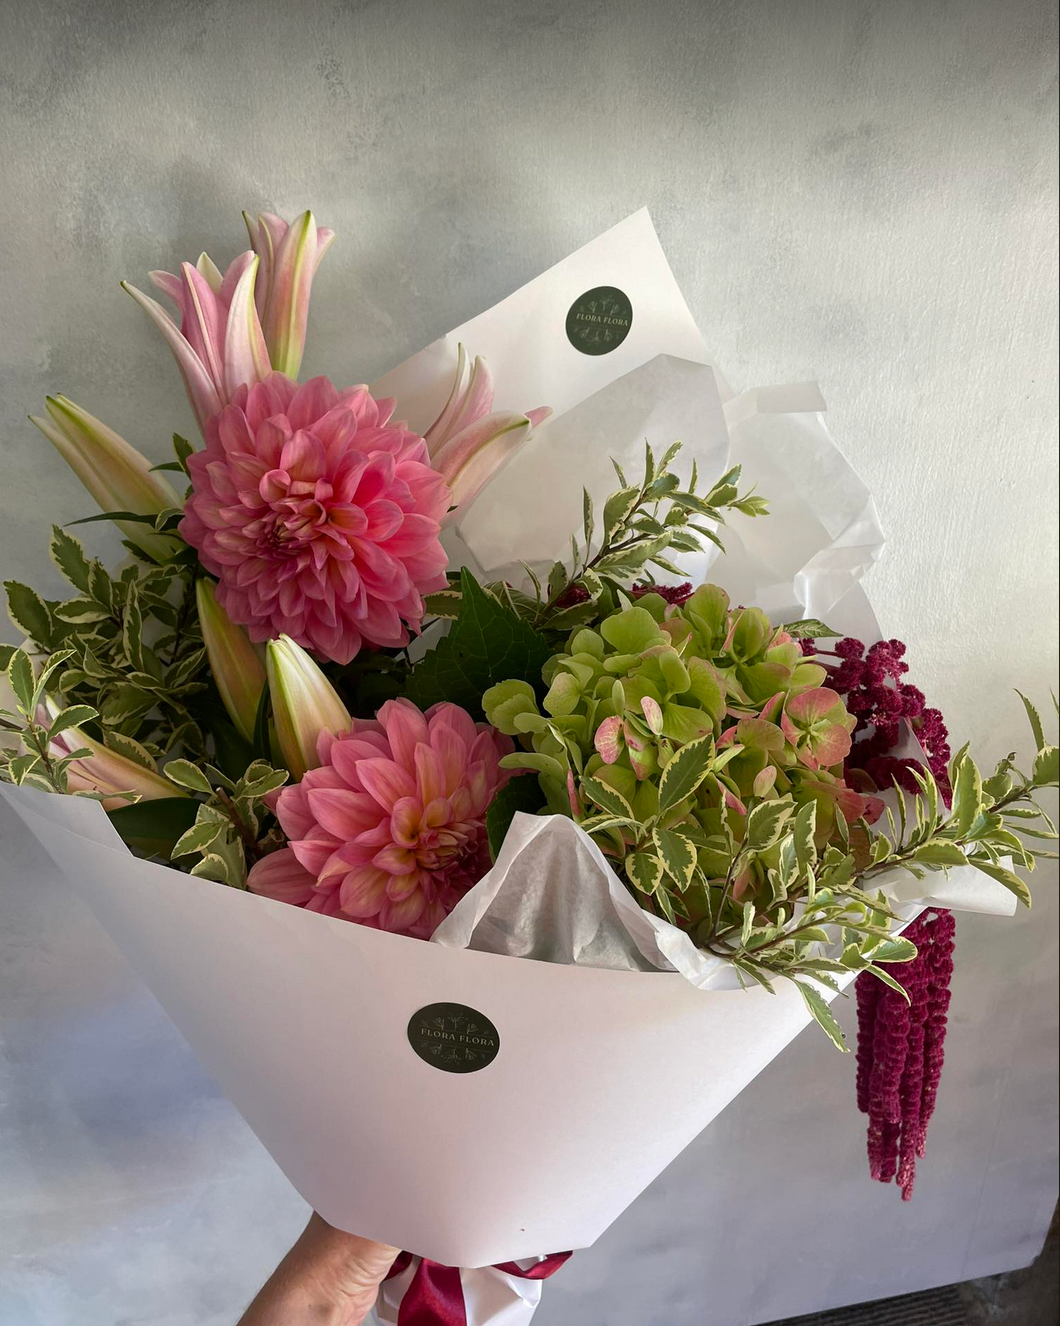 An example of what your Seasonal Bunch from Flora Flora could look like. Pink and green flowers with greenery, wrapped in white paper.